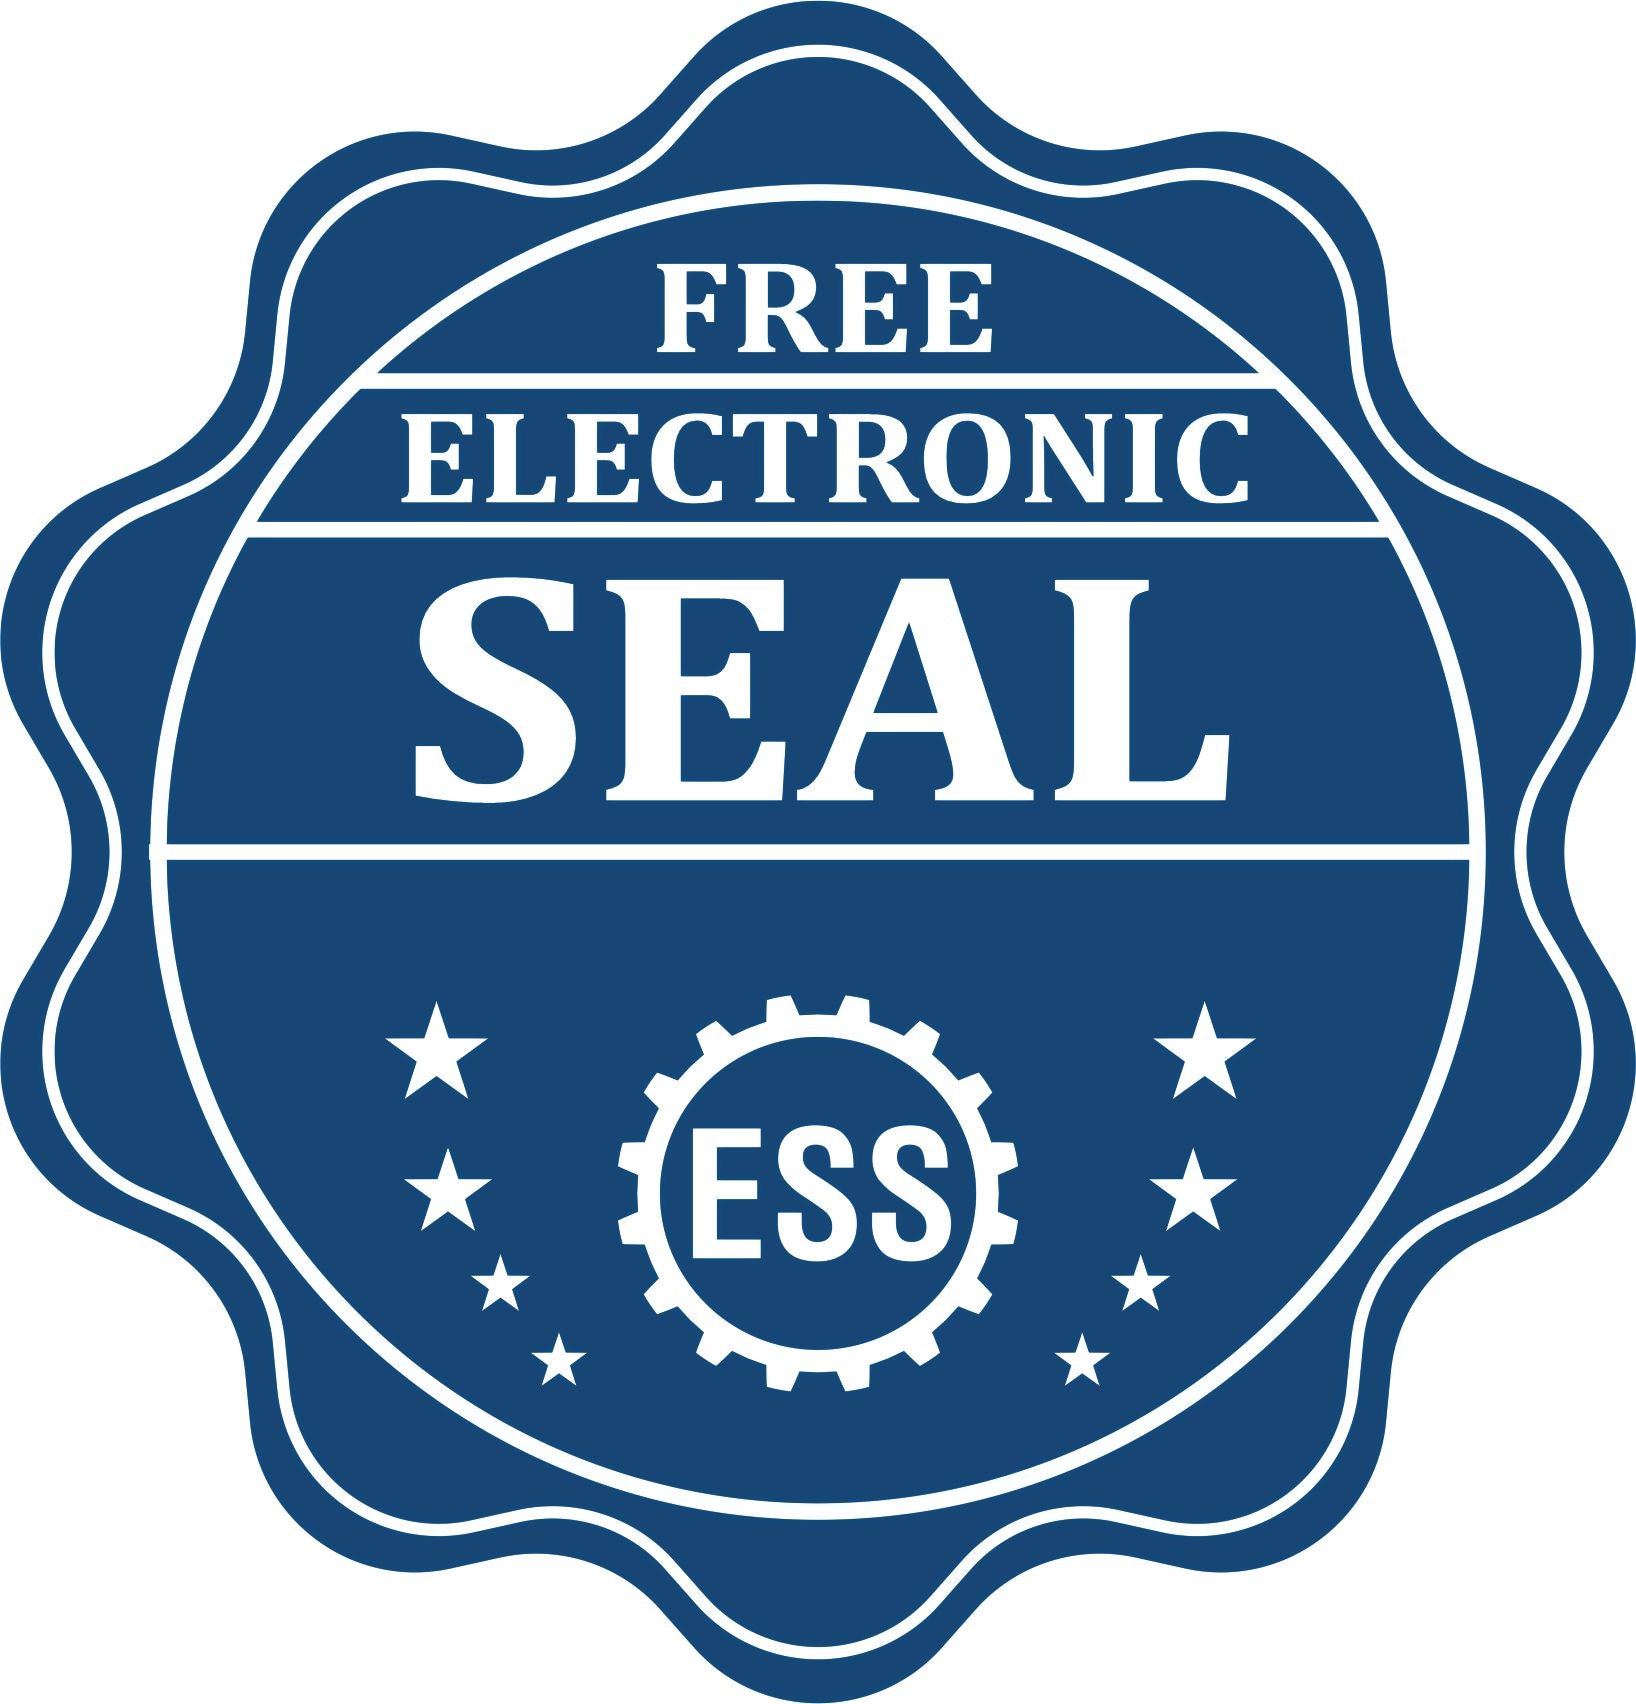 A badge showing a free electronic seal for the Slim Pre-Inked Hawaii Professional Engineer Seal Stamp with stars and the ESS gear on the emblem.